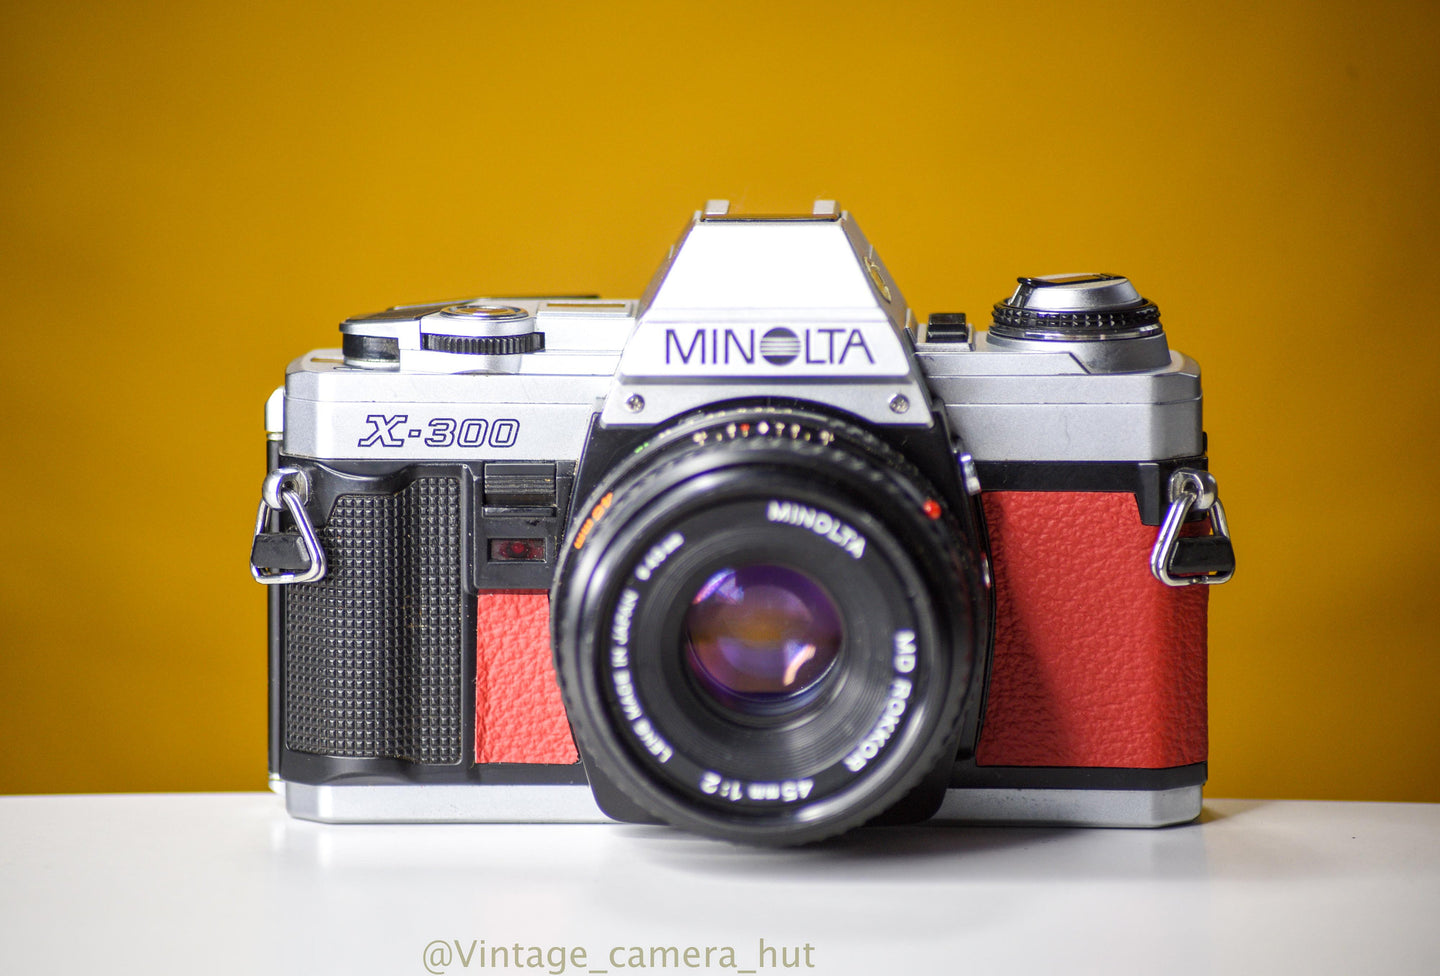 Minolta X-300 Vintage 35mm Film Camera with MInolta MD 45mm f/2 Prime Lens Reconditioned with New Red Skin